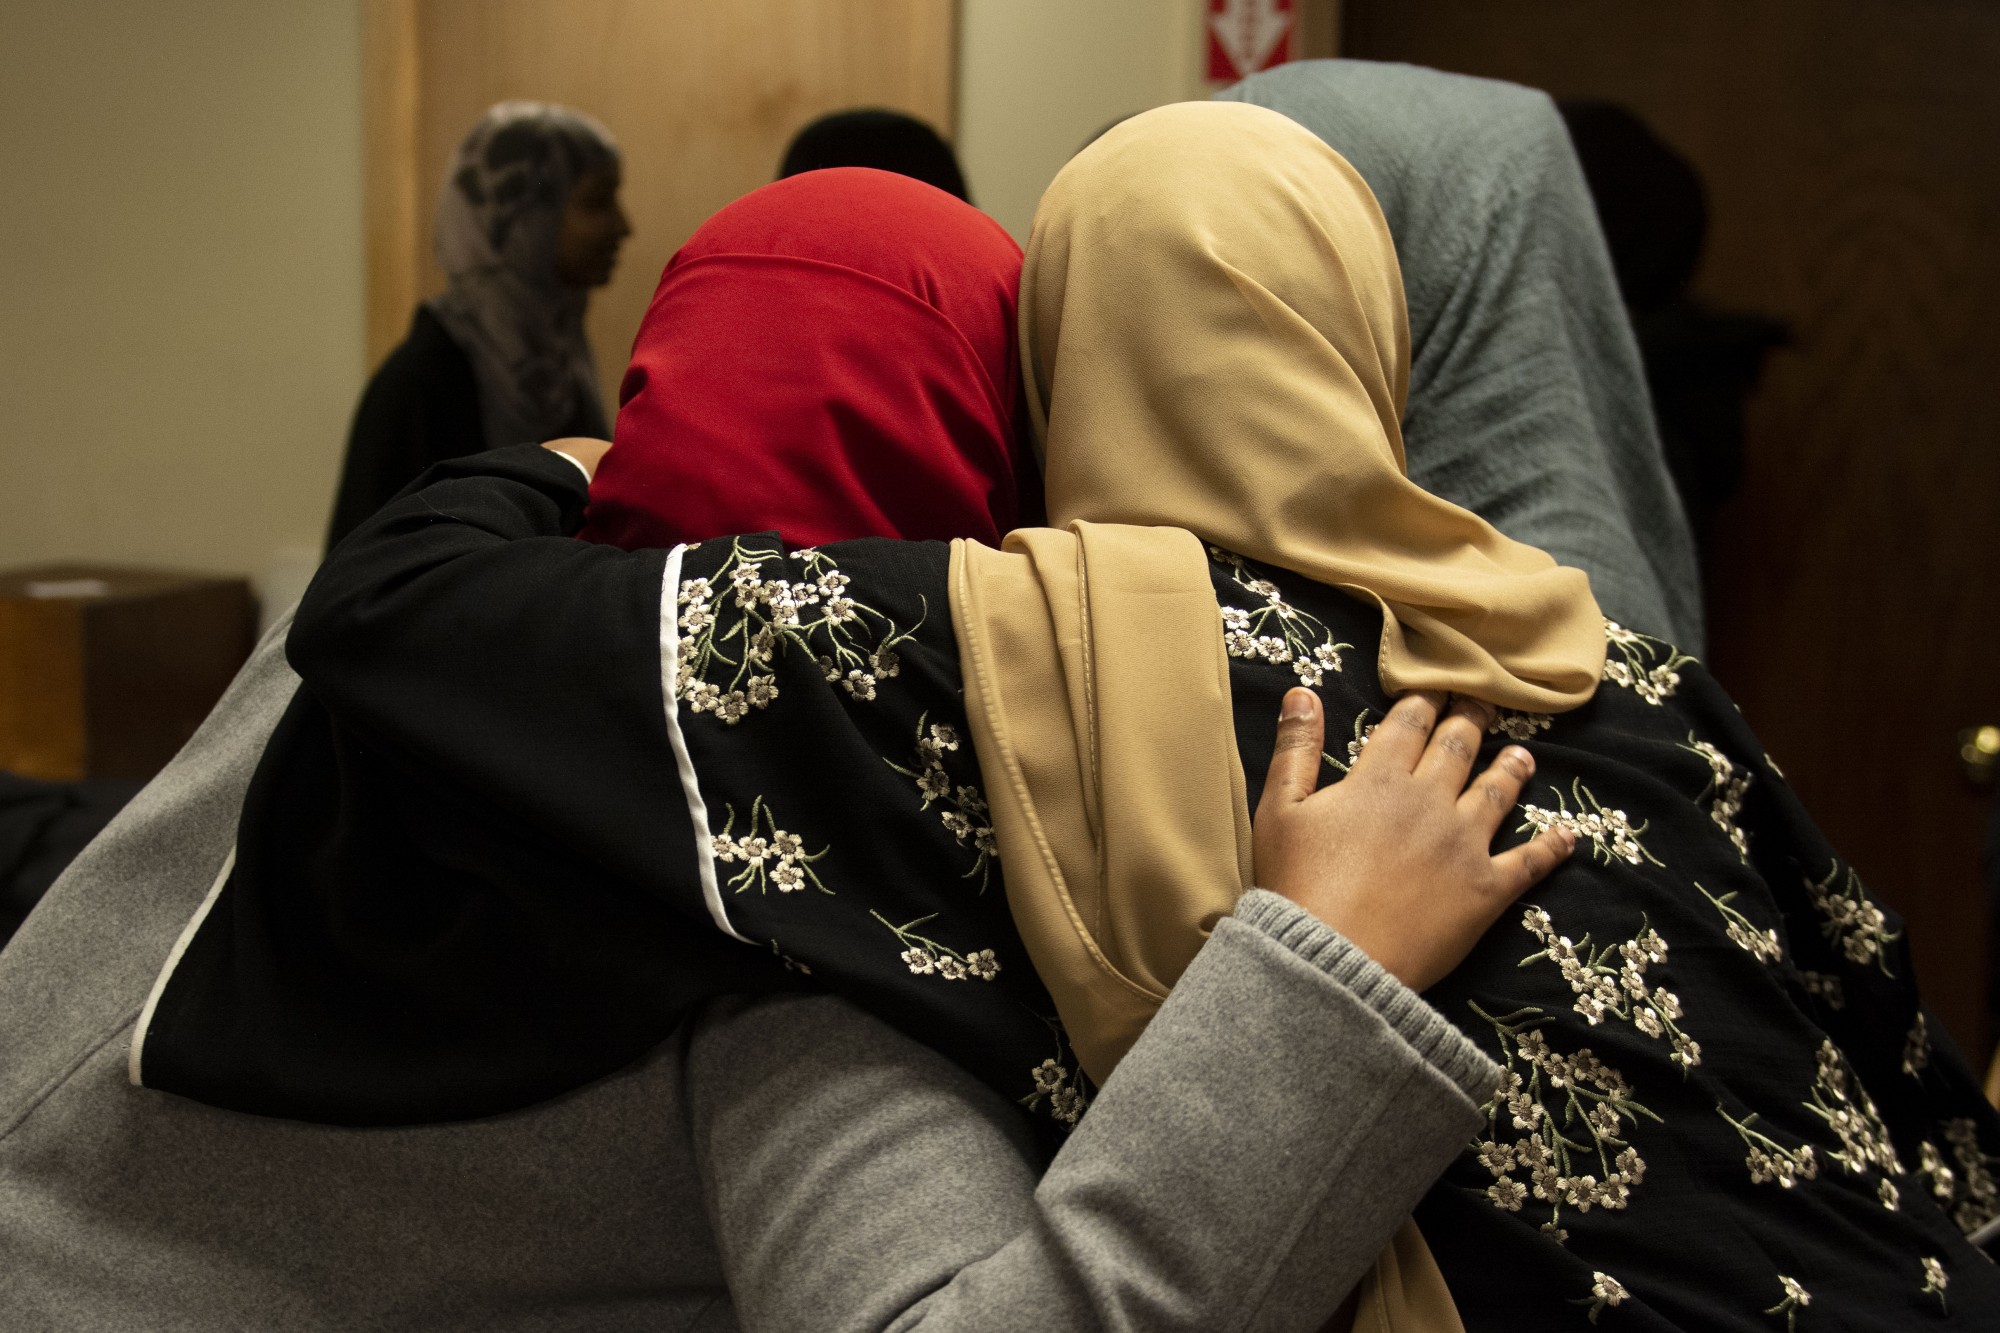 Attendees greet each other with a hug at the Muslim Alumni Network kickoff event at Masjid Al-Iman on Friday, Feb. 7.